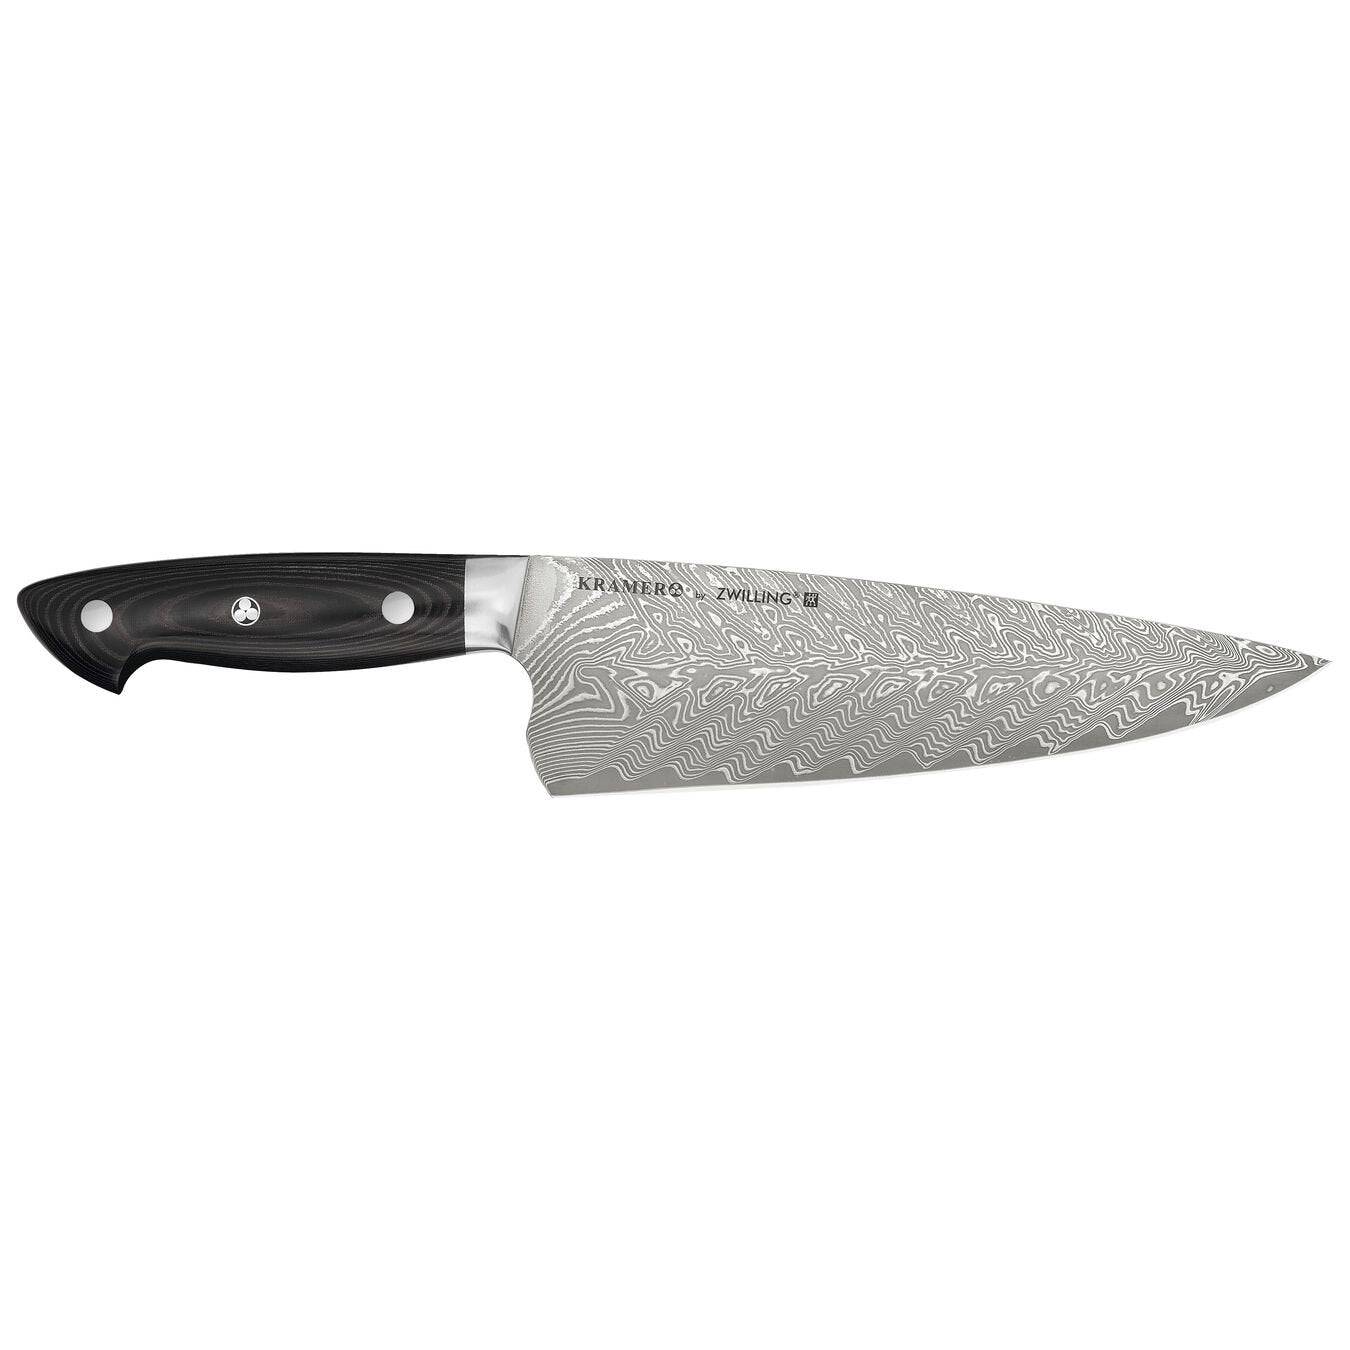 Zwilling Bob Kramer Euroline Damascus Collection SG2 Stainless Steel Chef's Knife, 8-Inches - Kitchen Universe